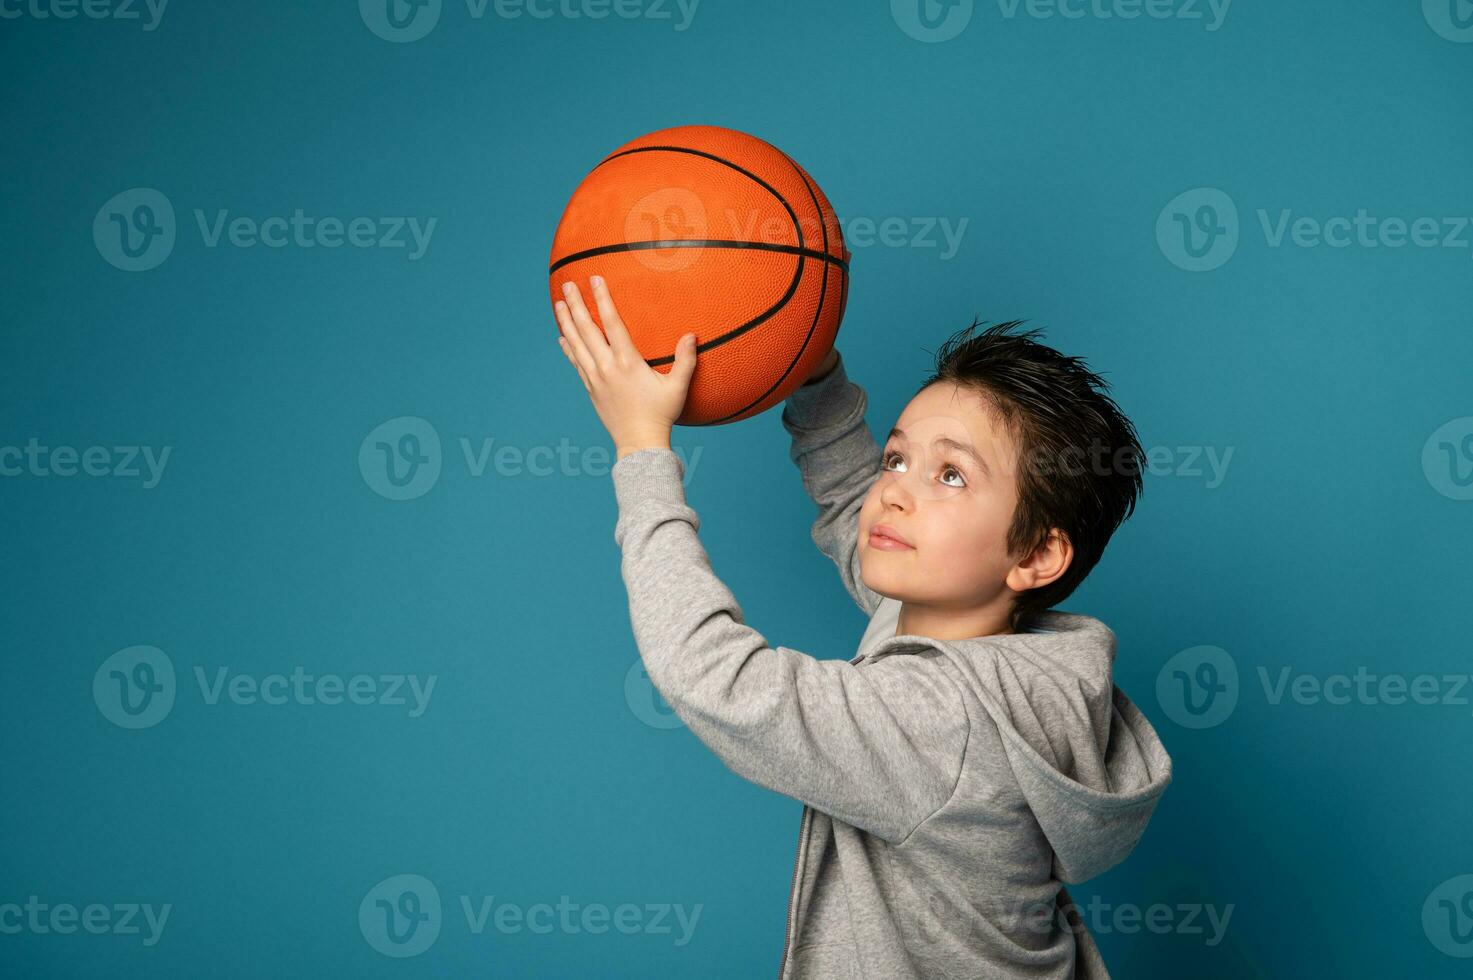 Teenage boy, basketball player, posing over blue background with an orange ball in the hands photo